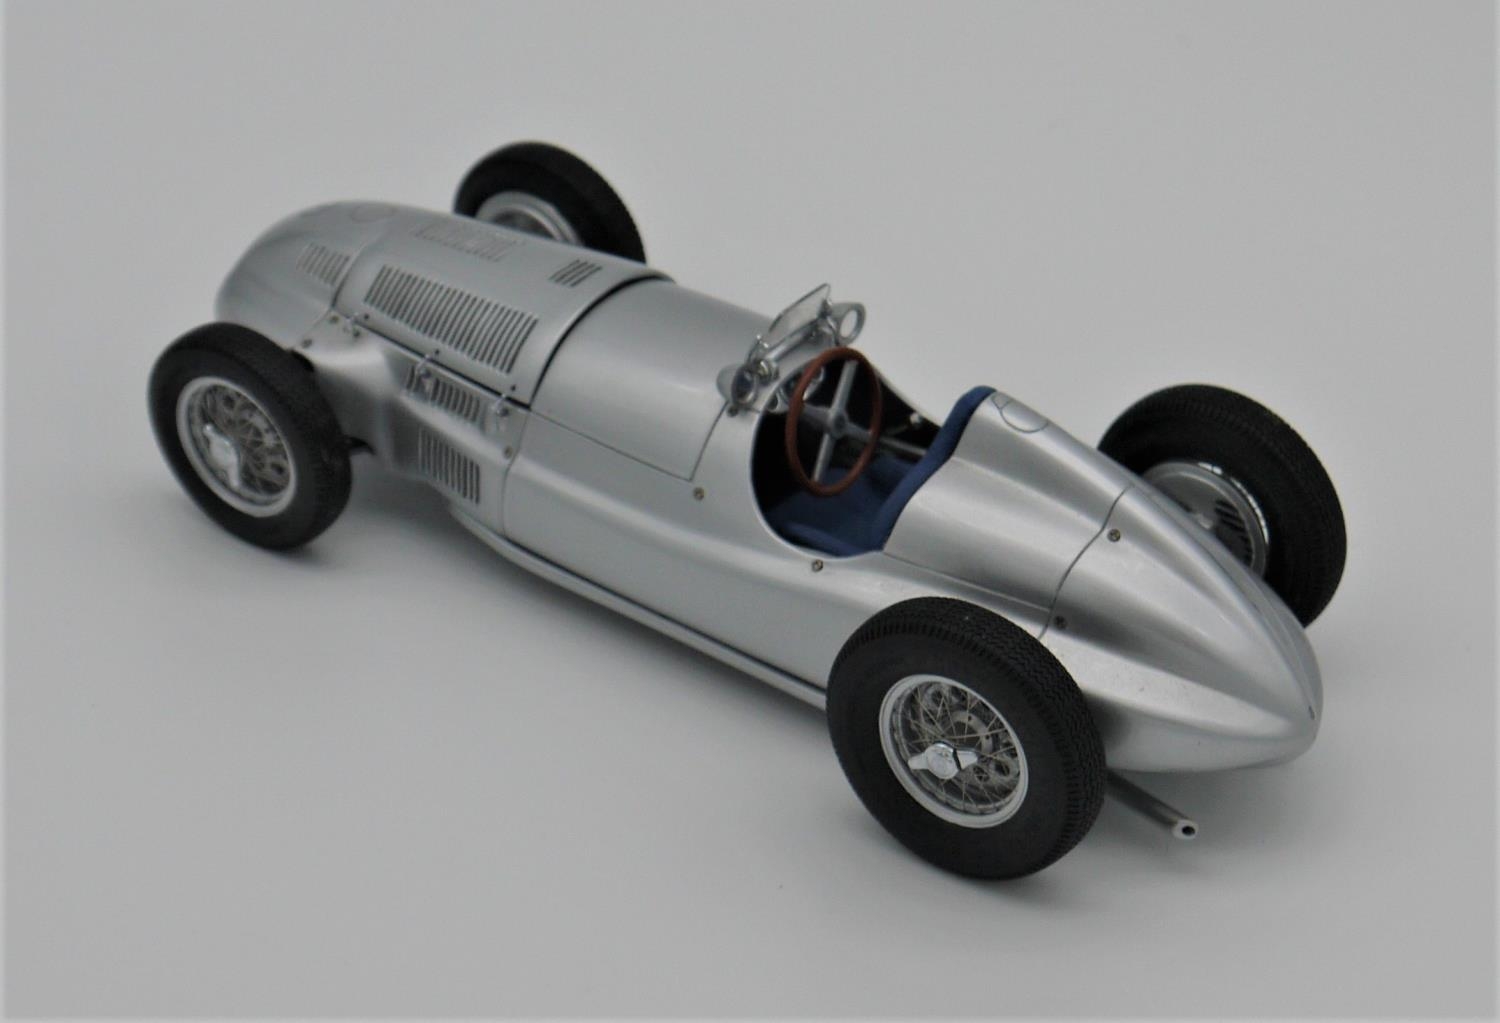 CMC MODELS 1:18 SCALE MODEL OF THE 1939 MERCEDES-BENZ W165 GRAND PRIX CAR (reference M018), accurate - Image 2 of 2